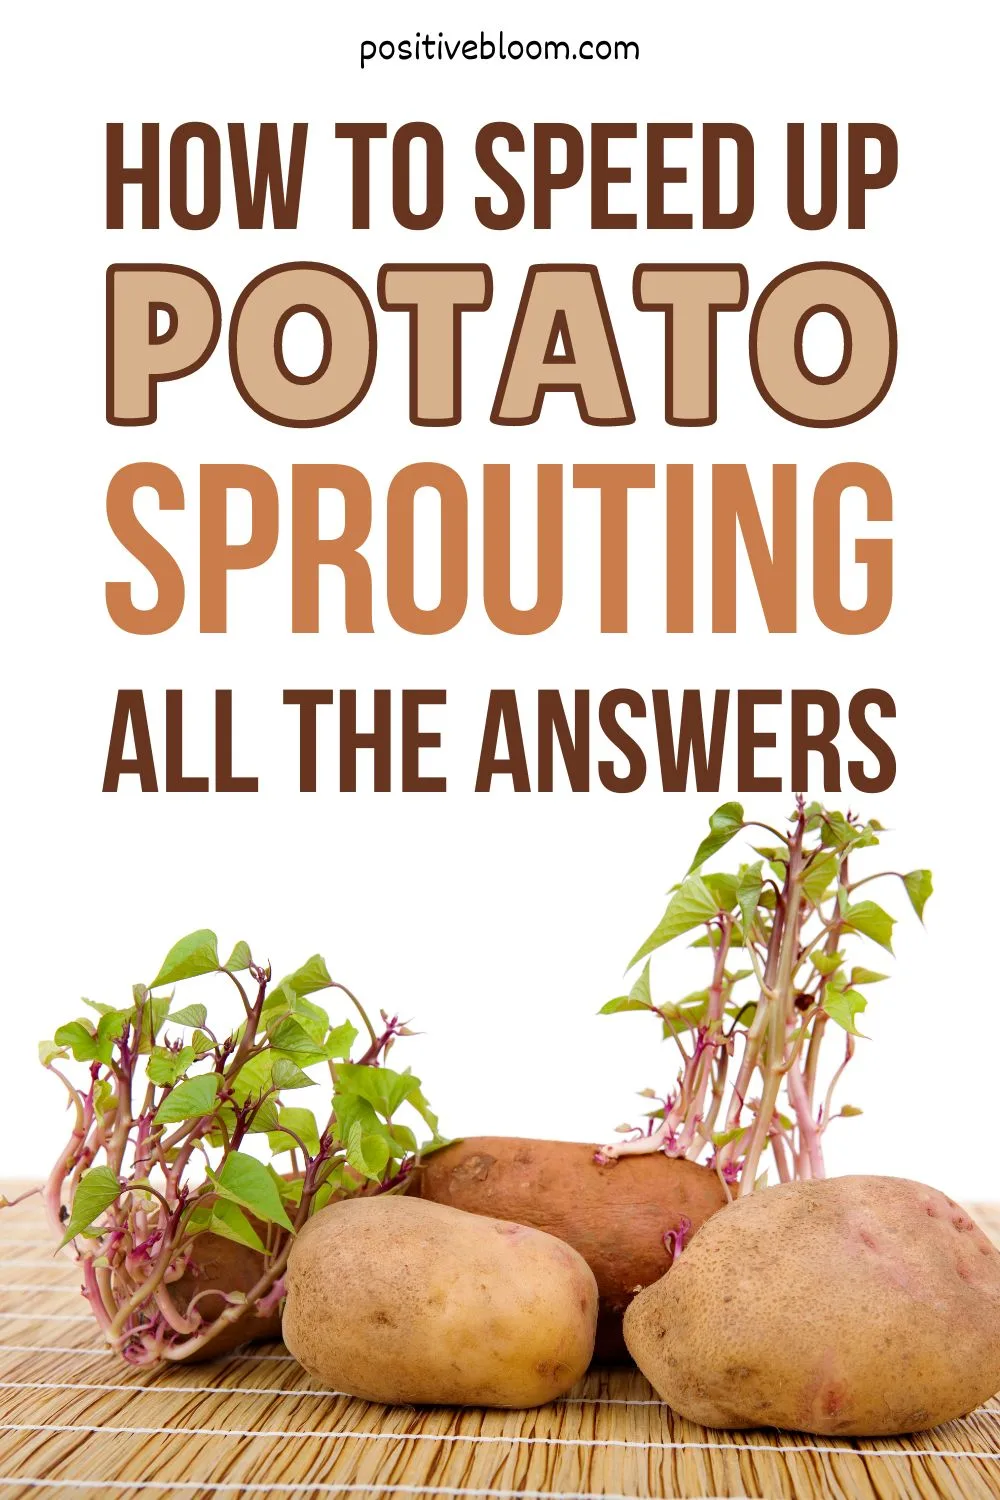 How To Speed Up Potato Sprouting All The Answers Pinterest